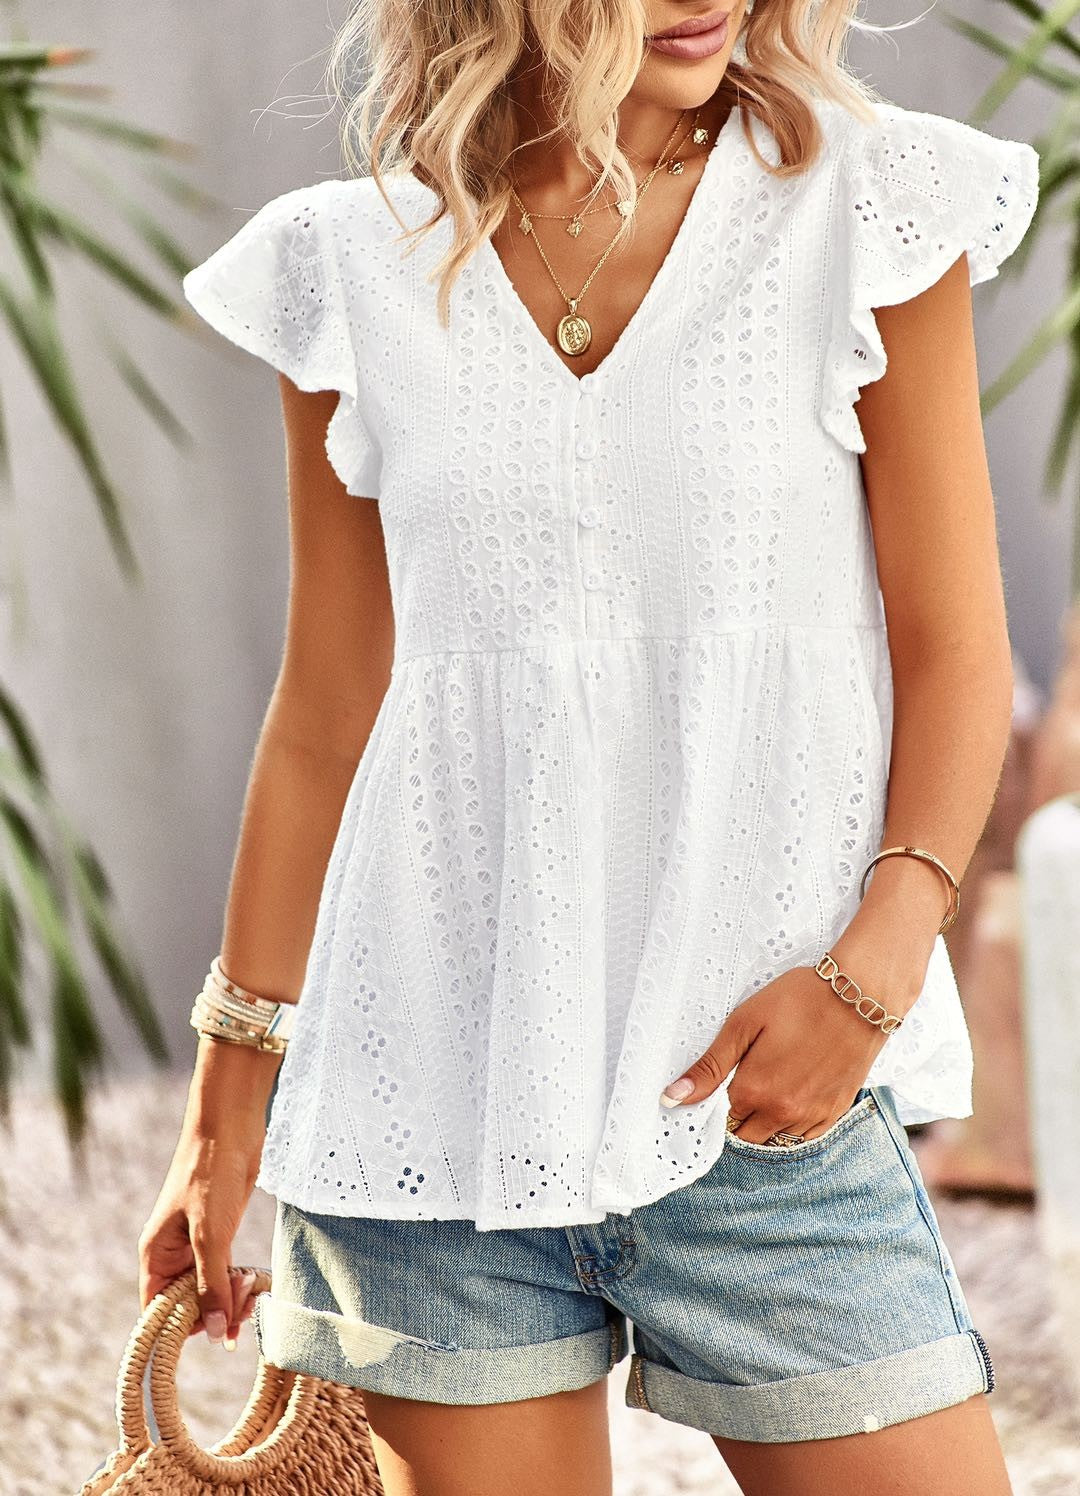 White Lacey Babydoll Top with Ruffle Sleeves – The Trendy Side